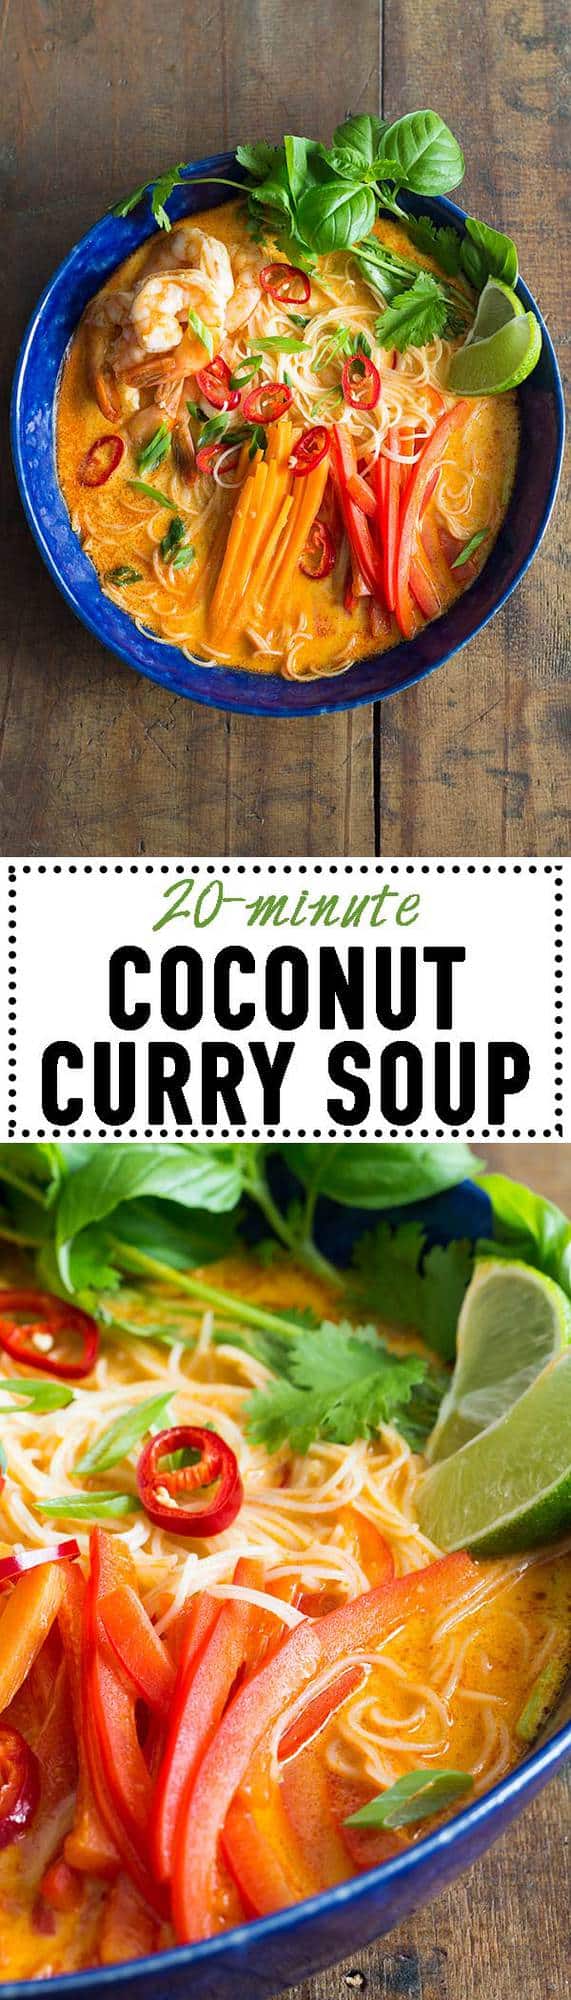 Coconut Curry Soup - Green Healthy Cooking